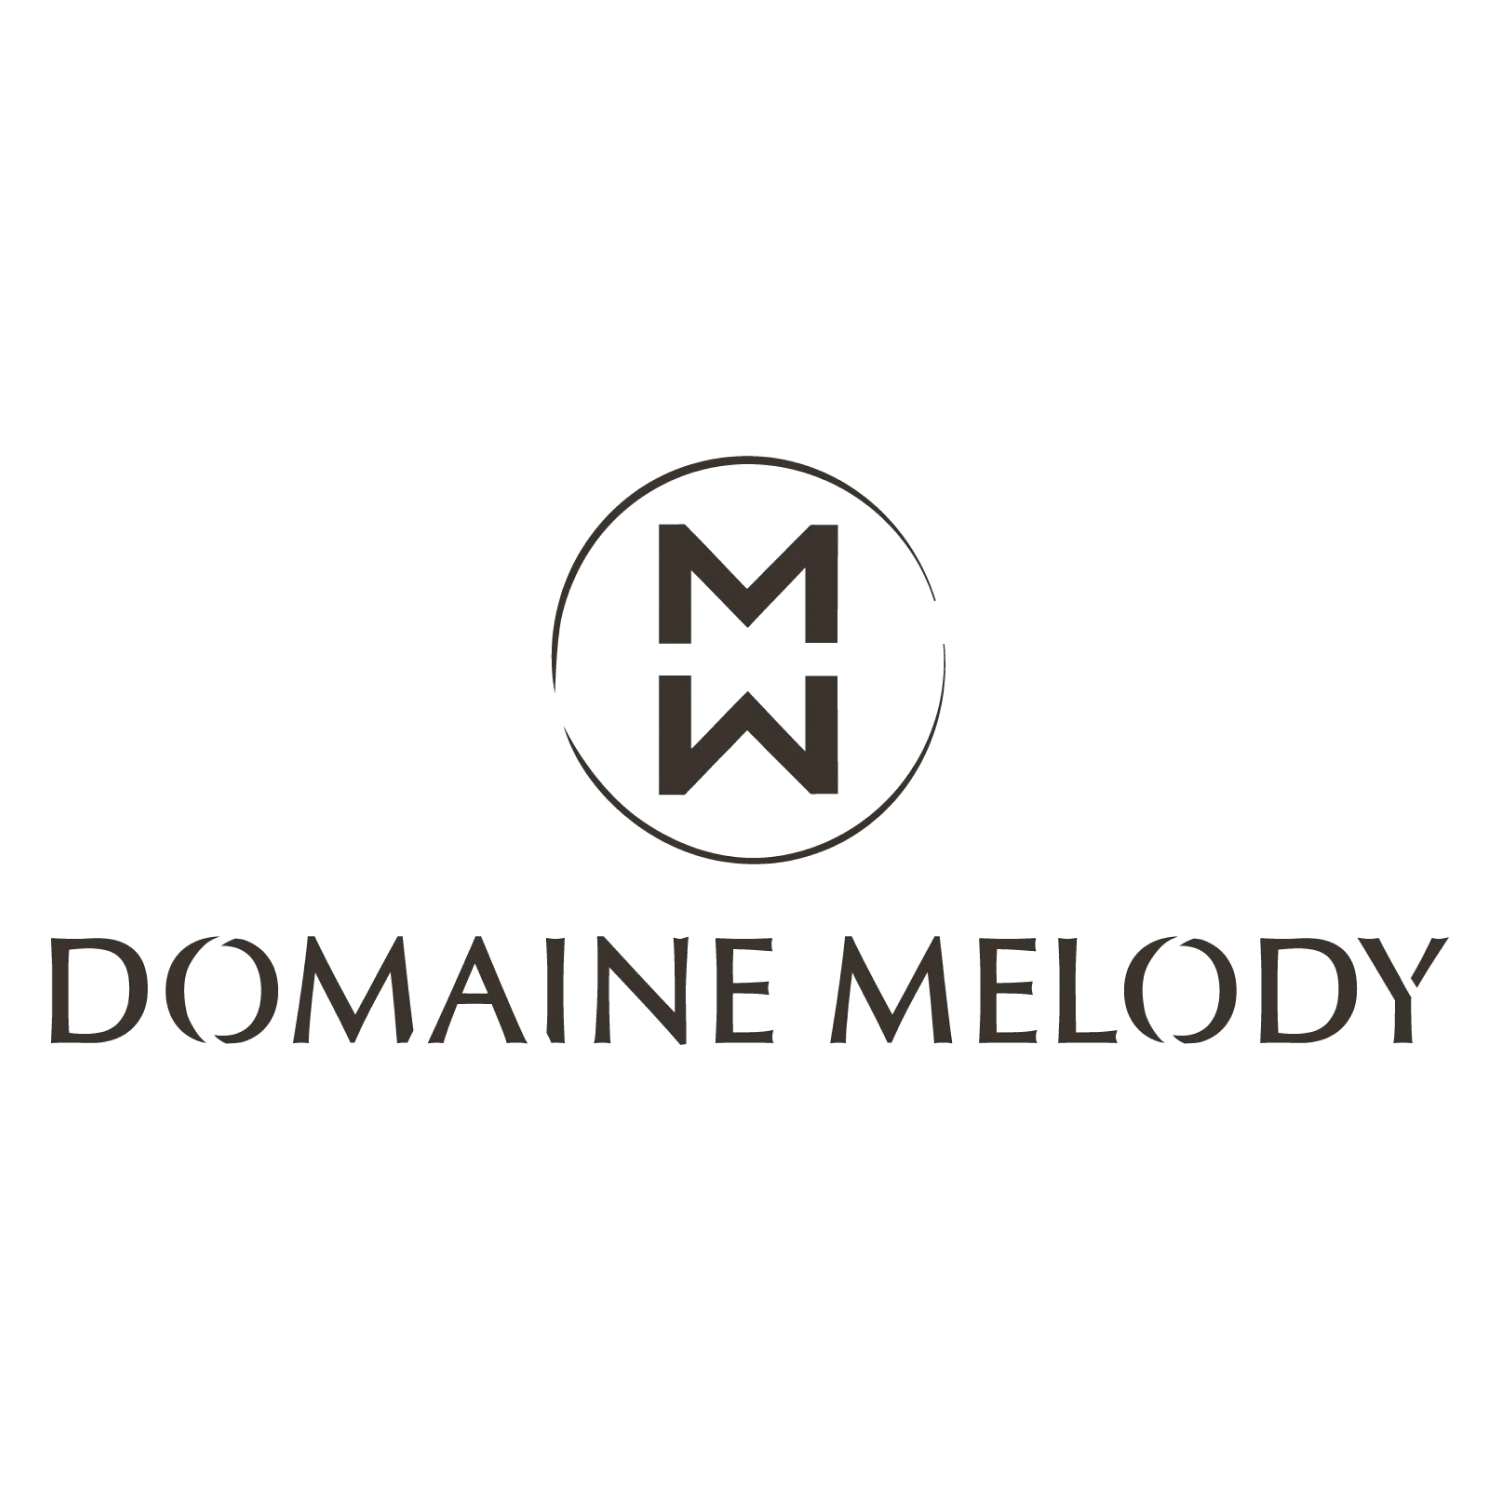 Domaine Melody